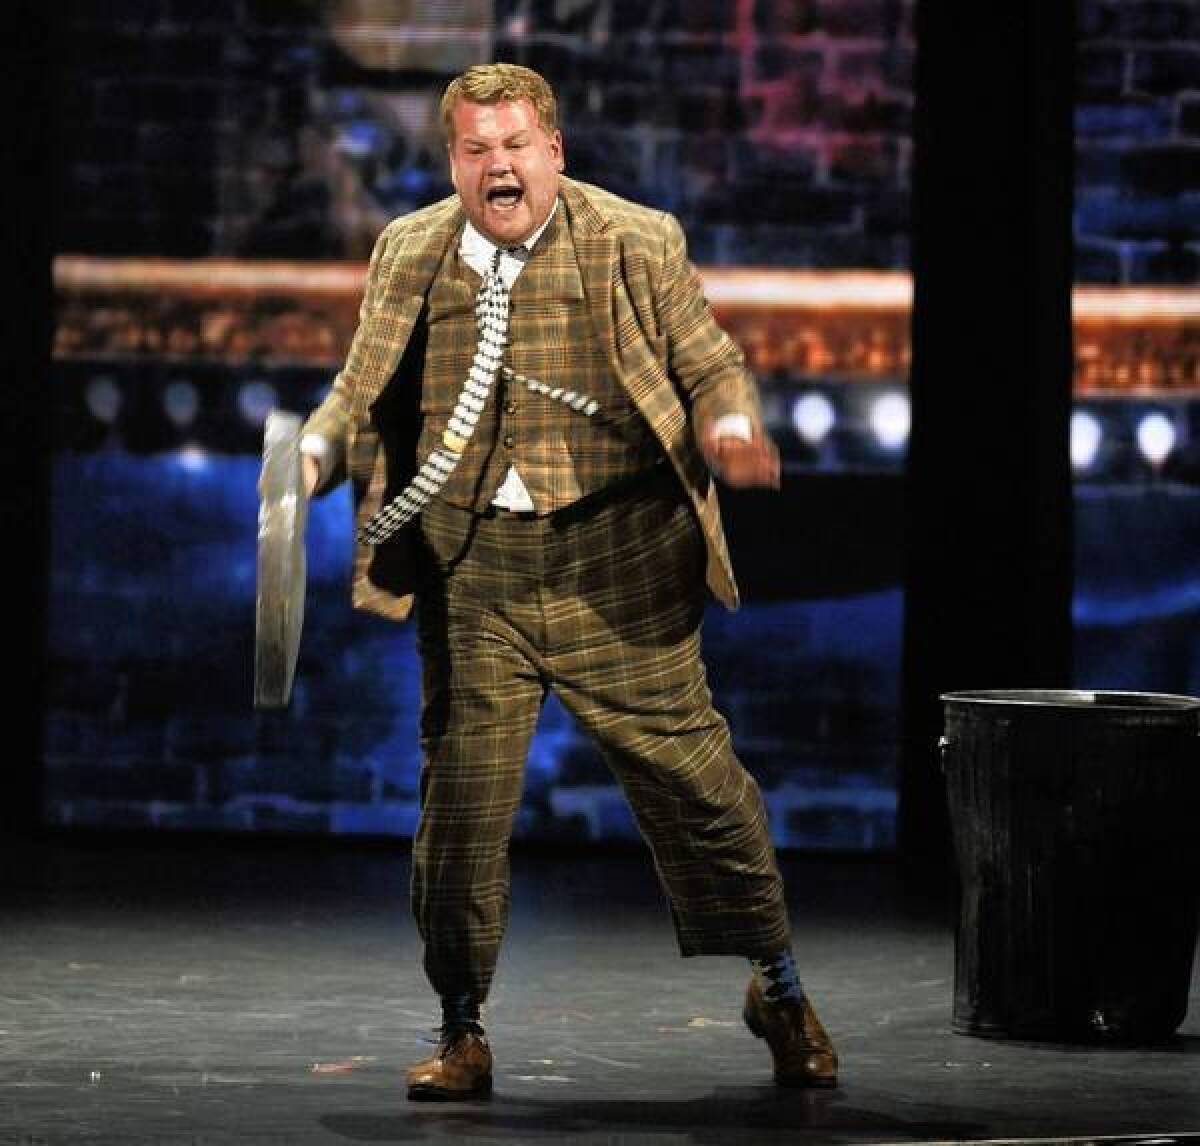 James Corden performs a scene from "One Man, Two Guvnors" at the Tony Awards show on Sunday.